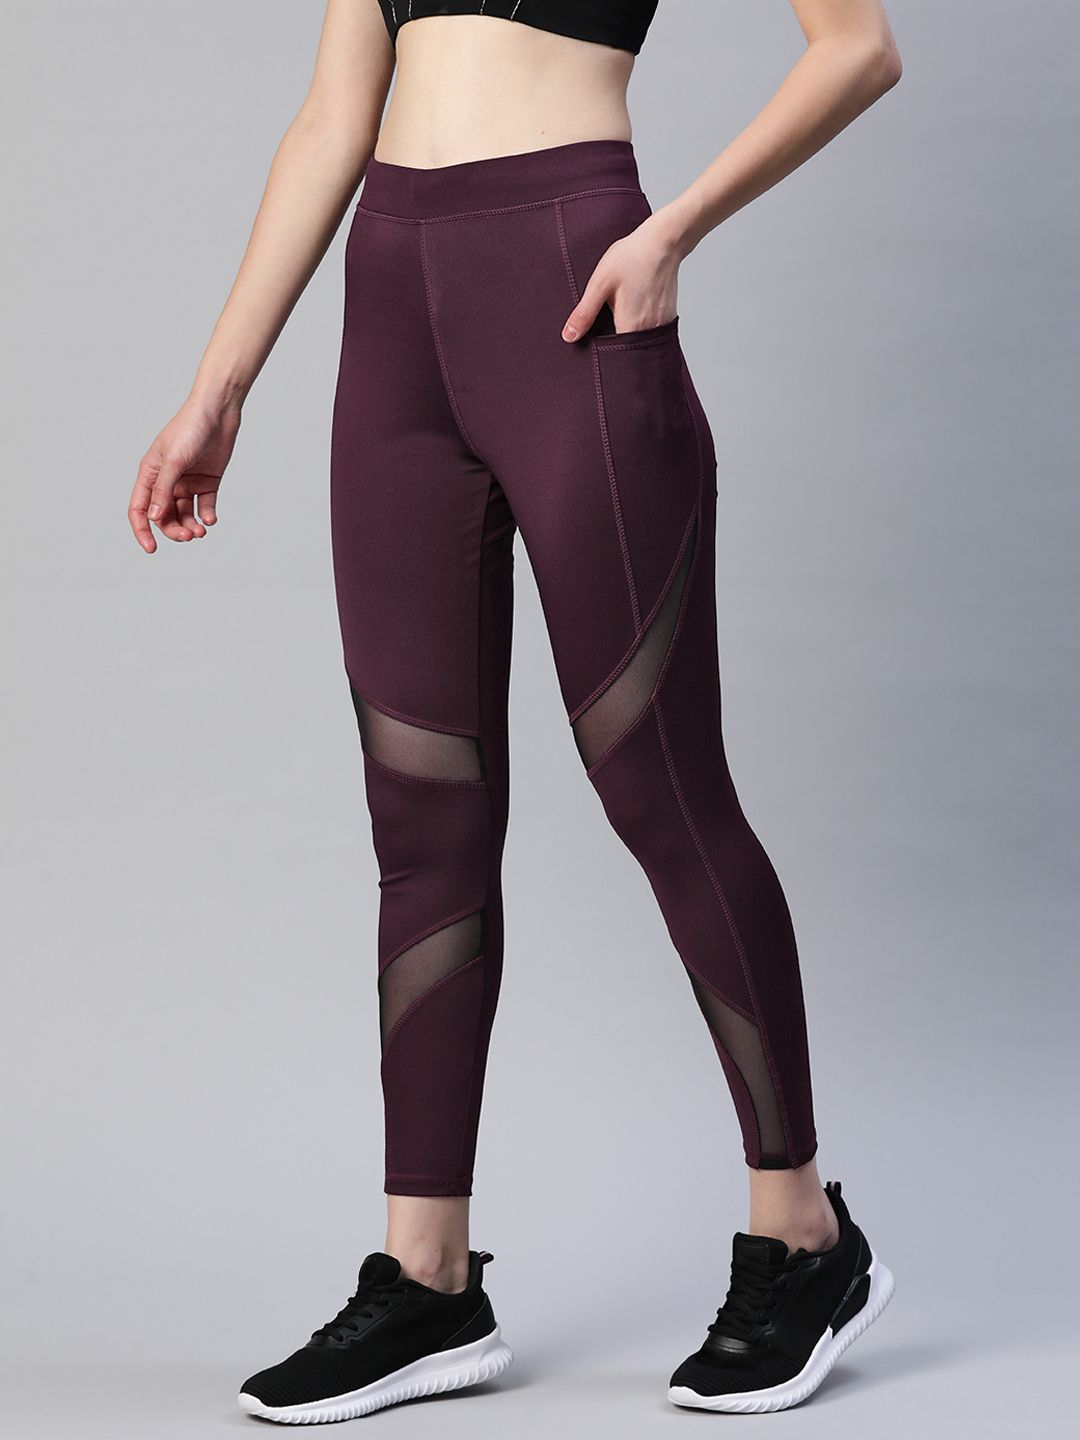 Blinkin Women Maroon Rapid Dry Tights With Breathable Mesh Panels & Side Pockets Price in India